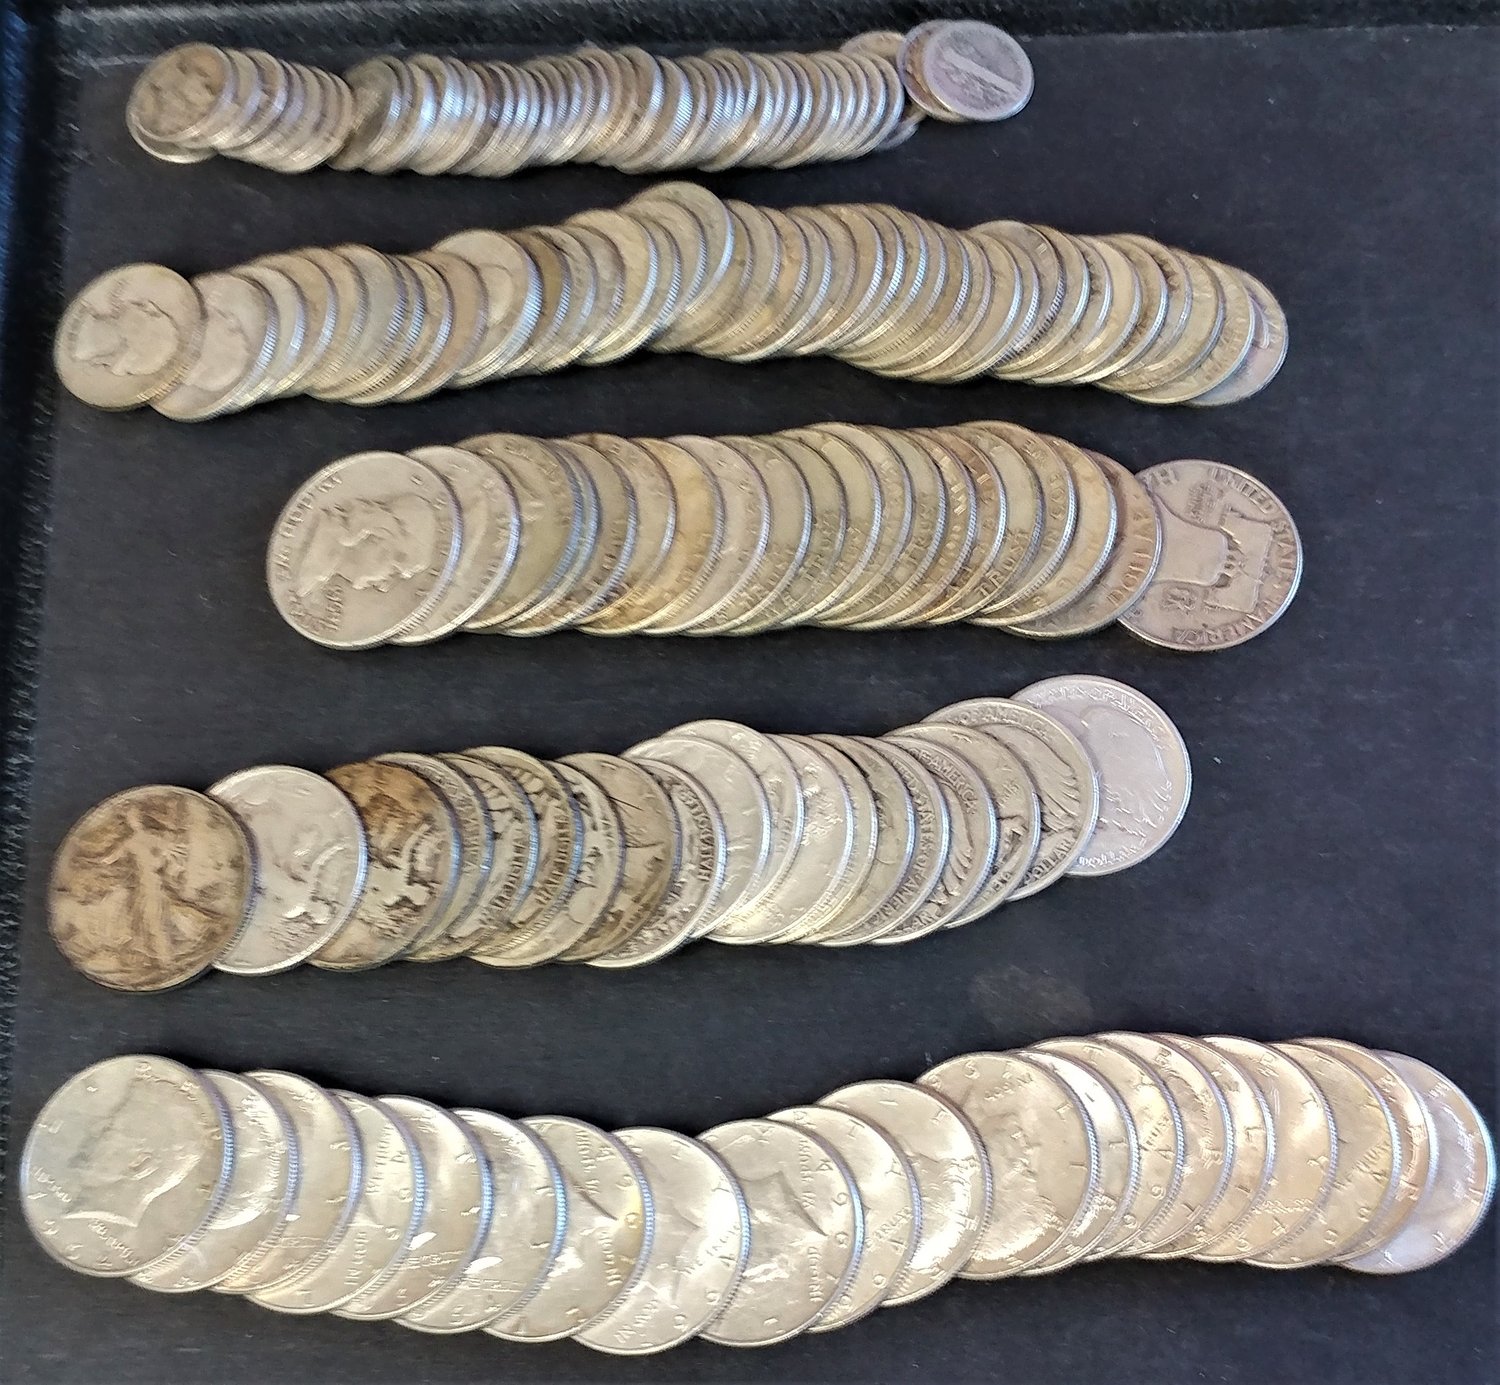 So called “junk coins” include 90-percent silver half-dollars, quarters and dimes.